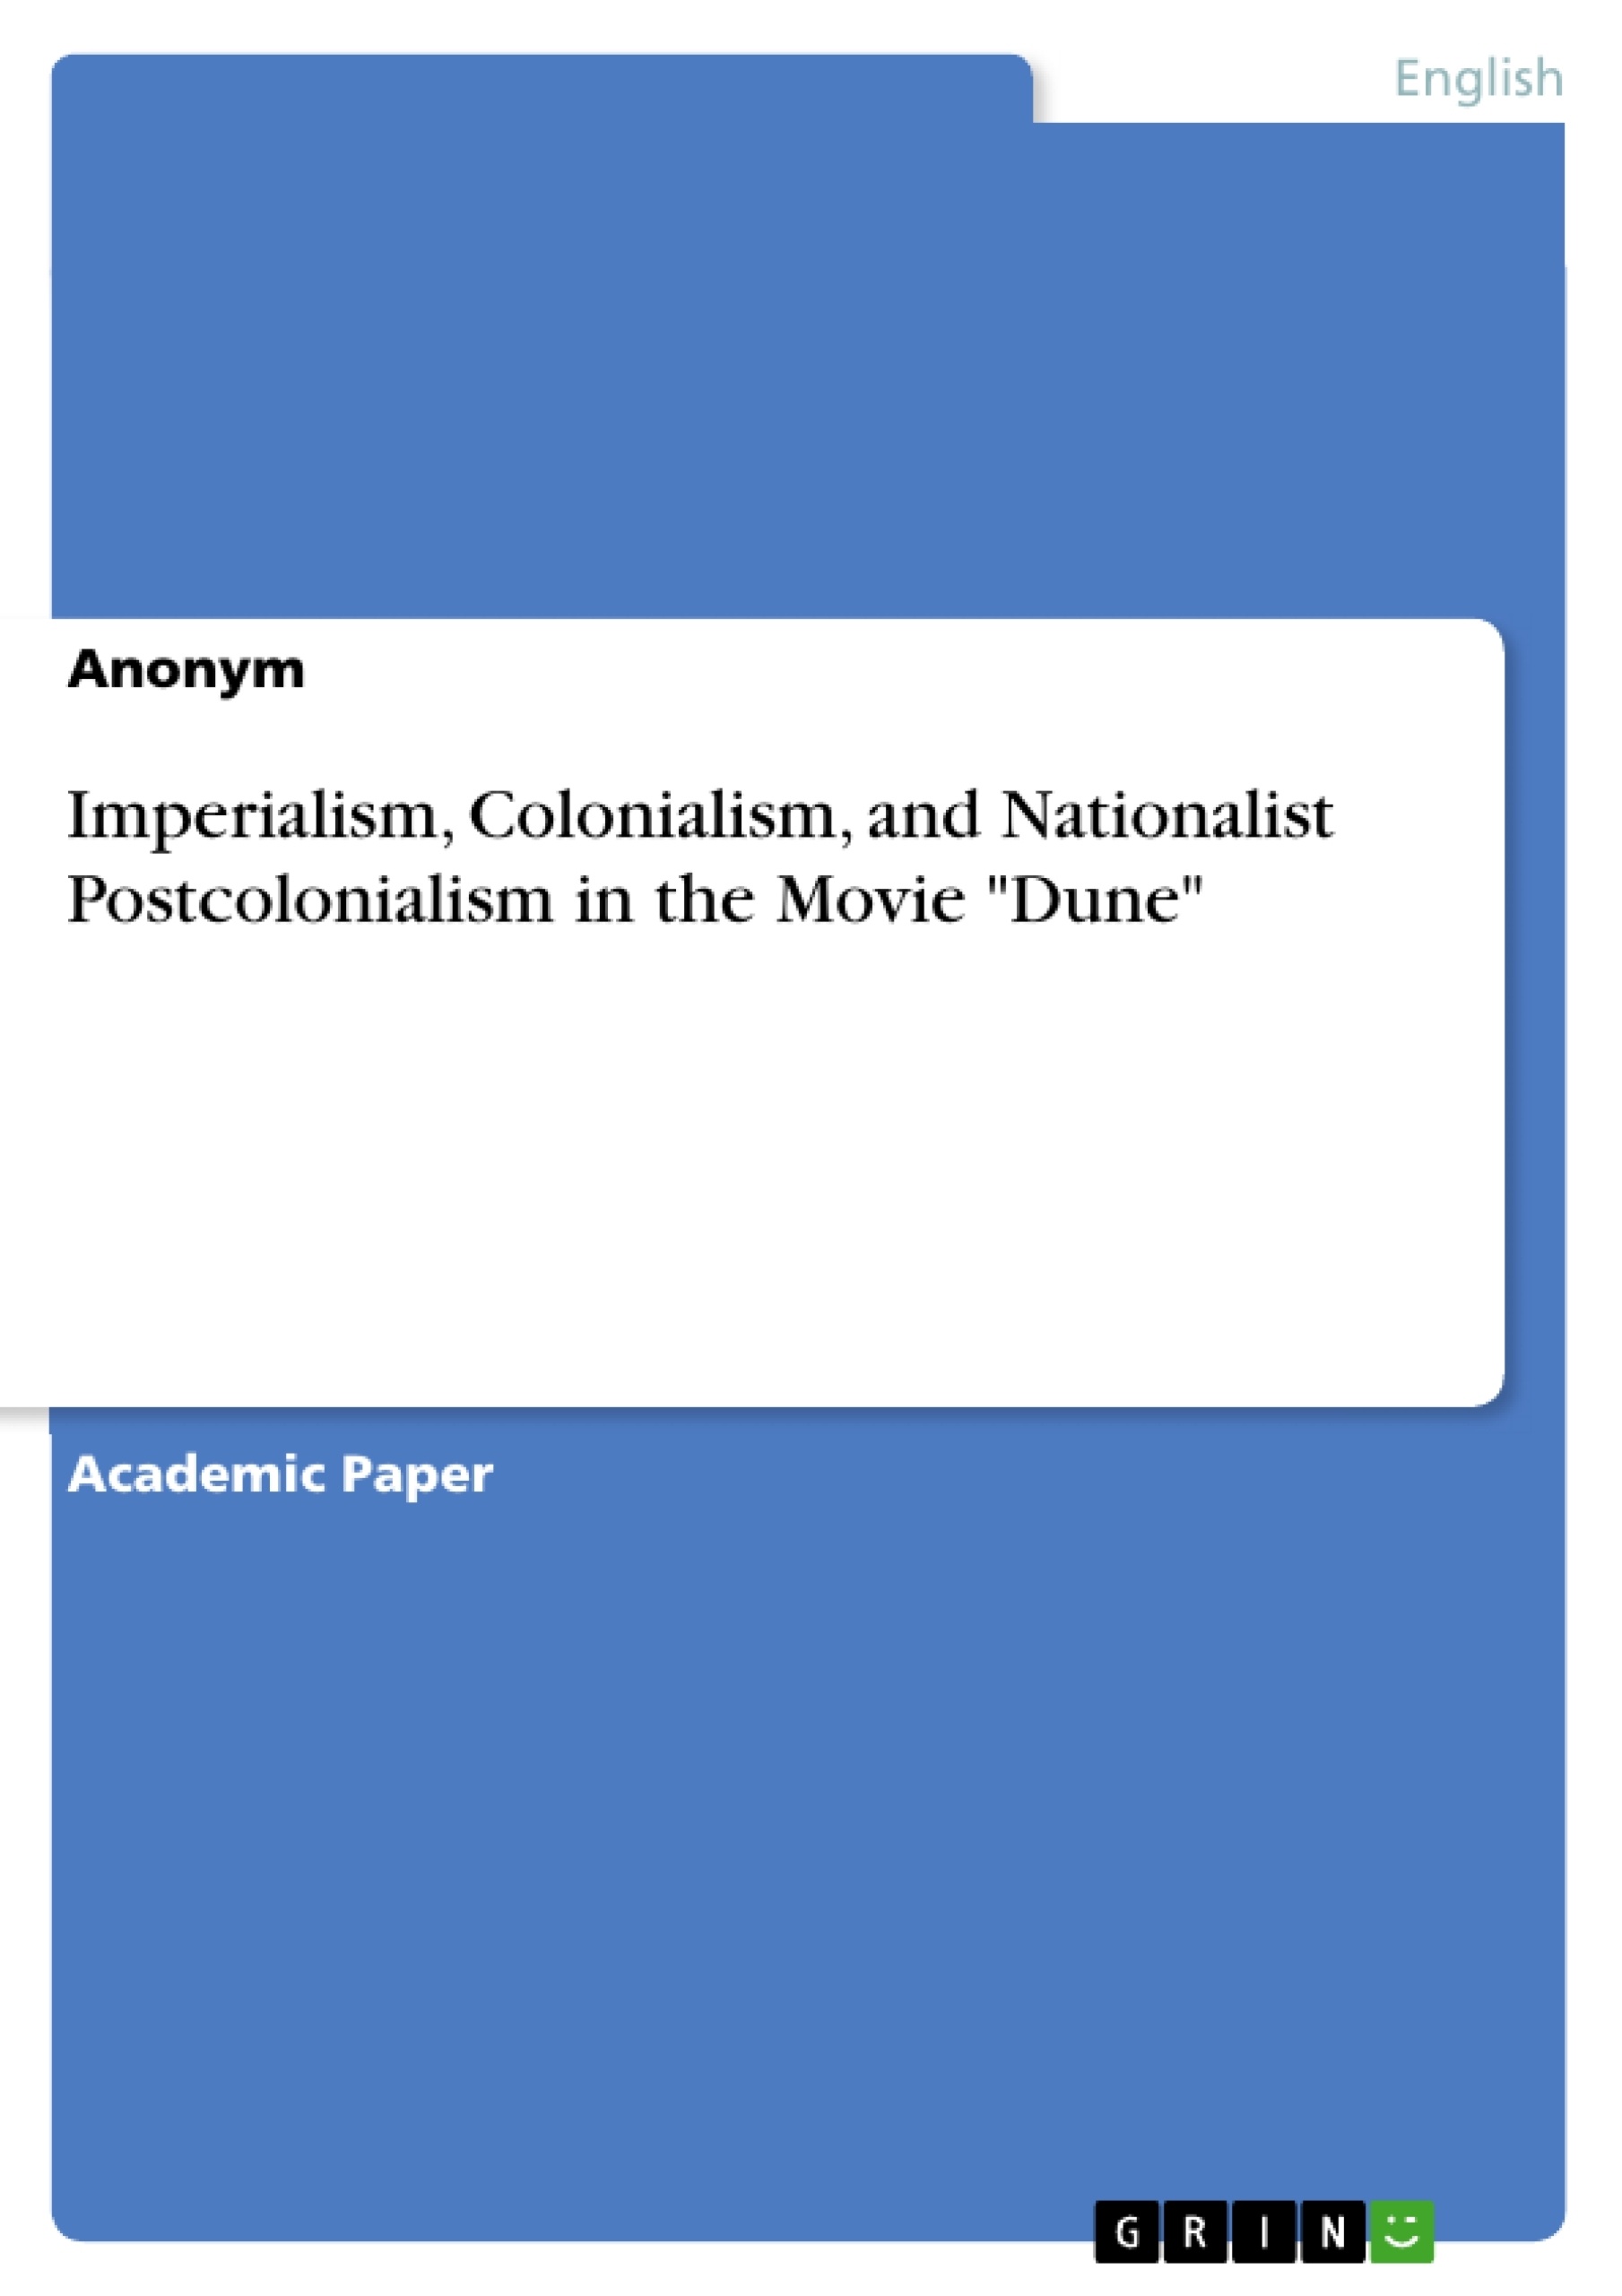 Title: Imperialism, Colonialism, and Nationalist Postcolonialism in the Movie "Dune"